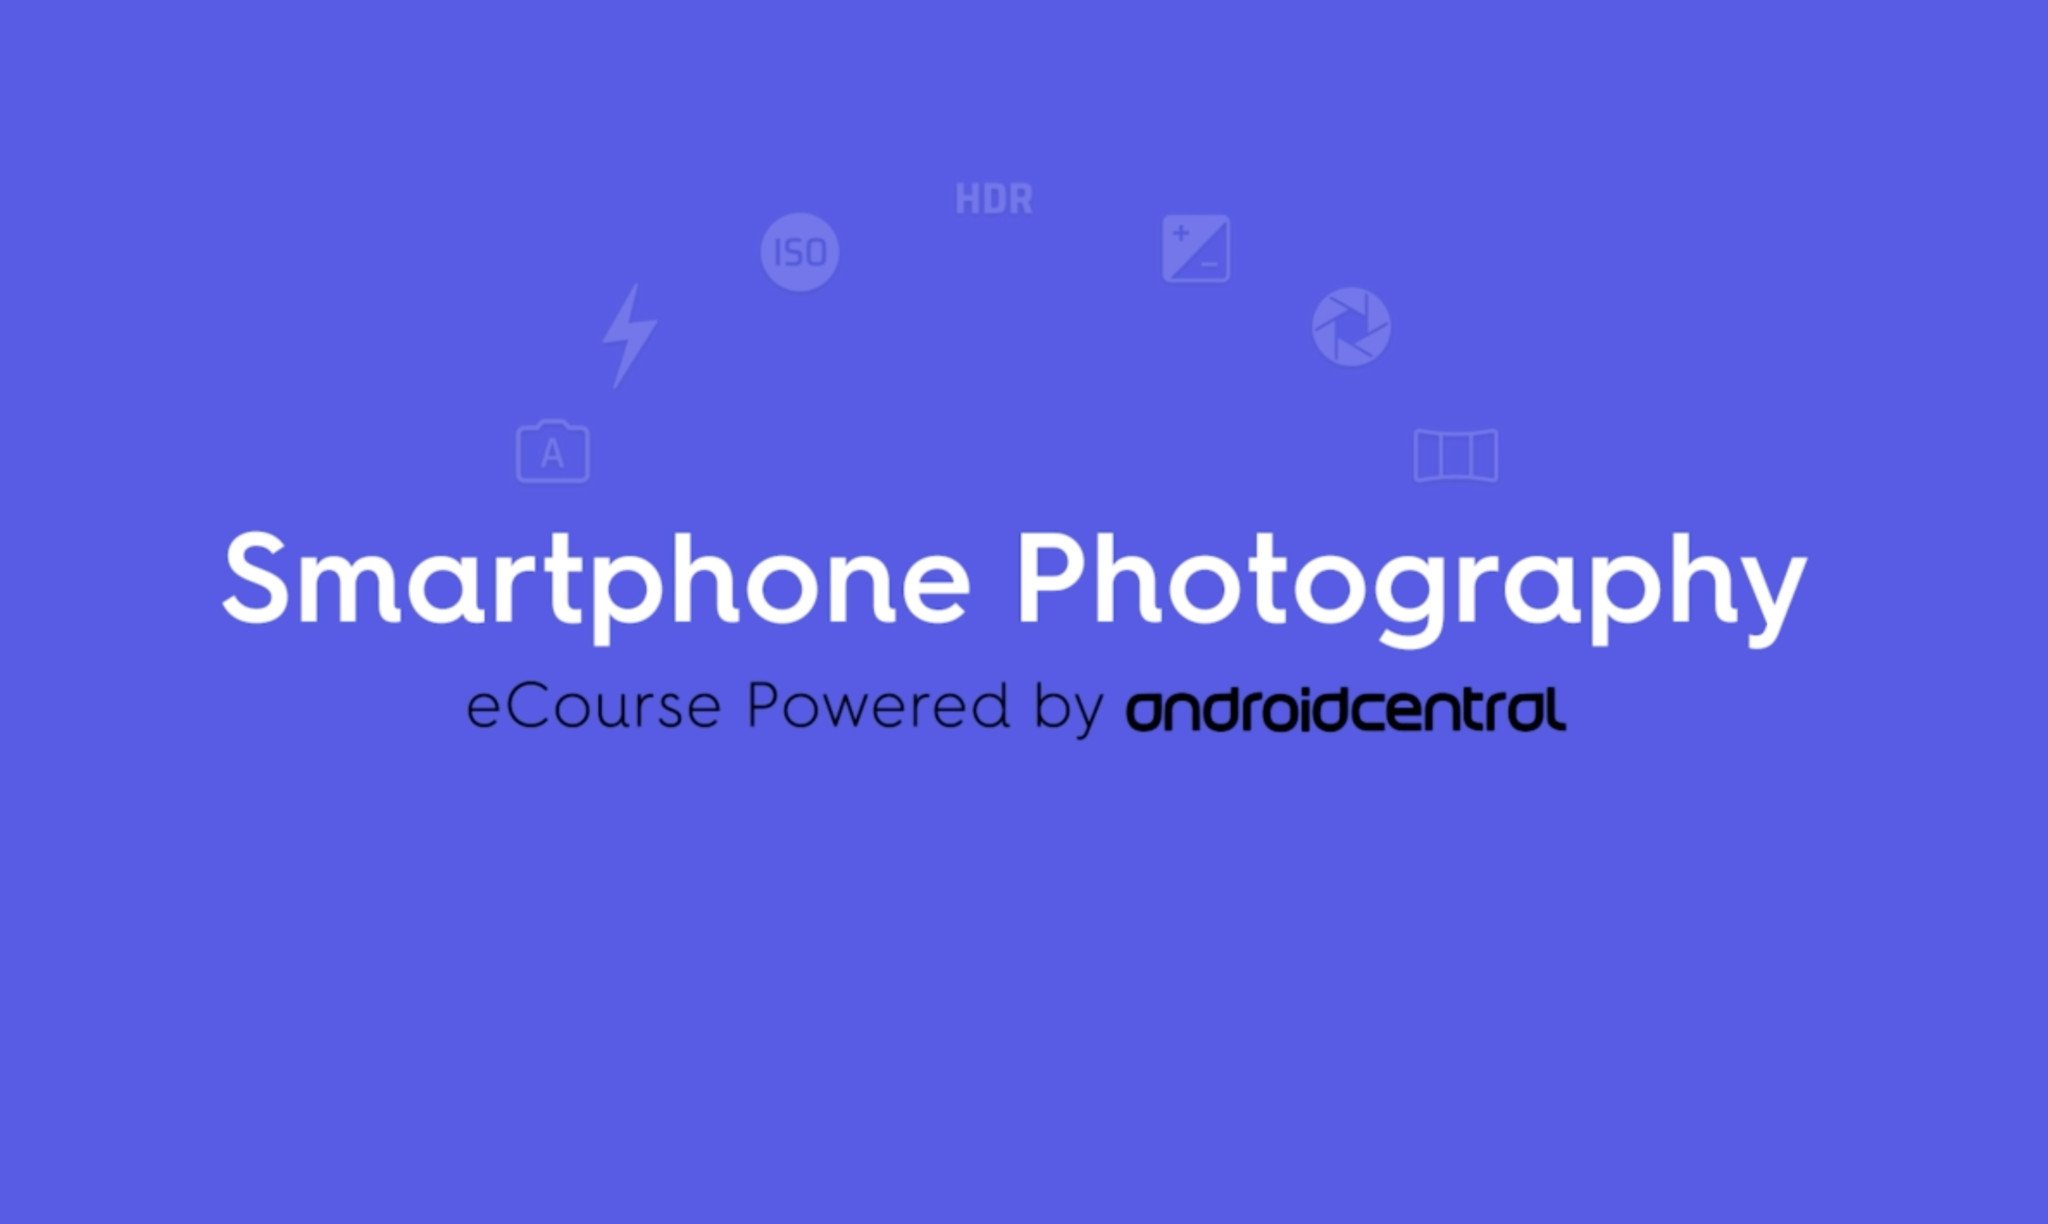 Android Central Smartphone Photography eCourse